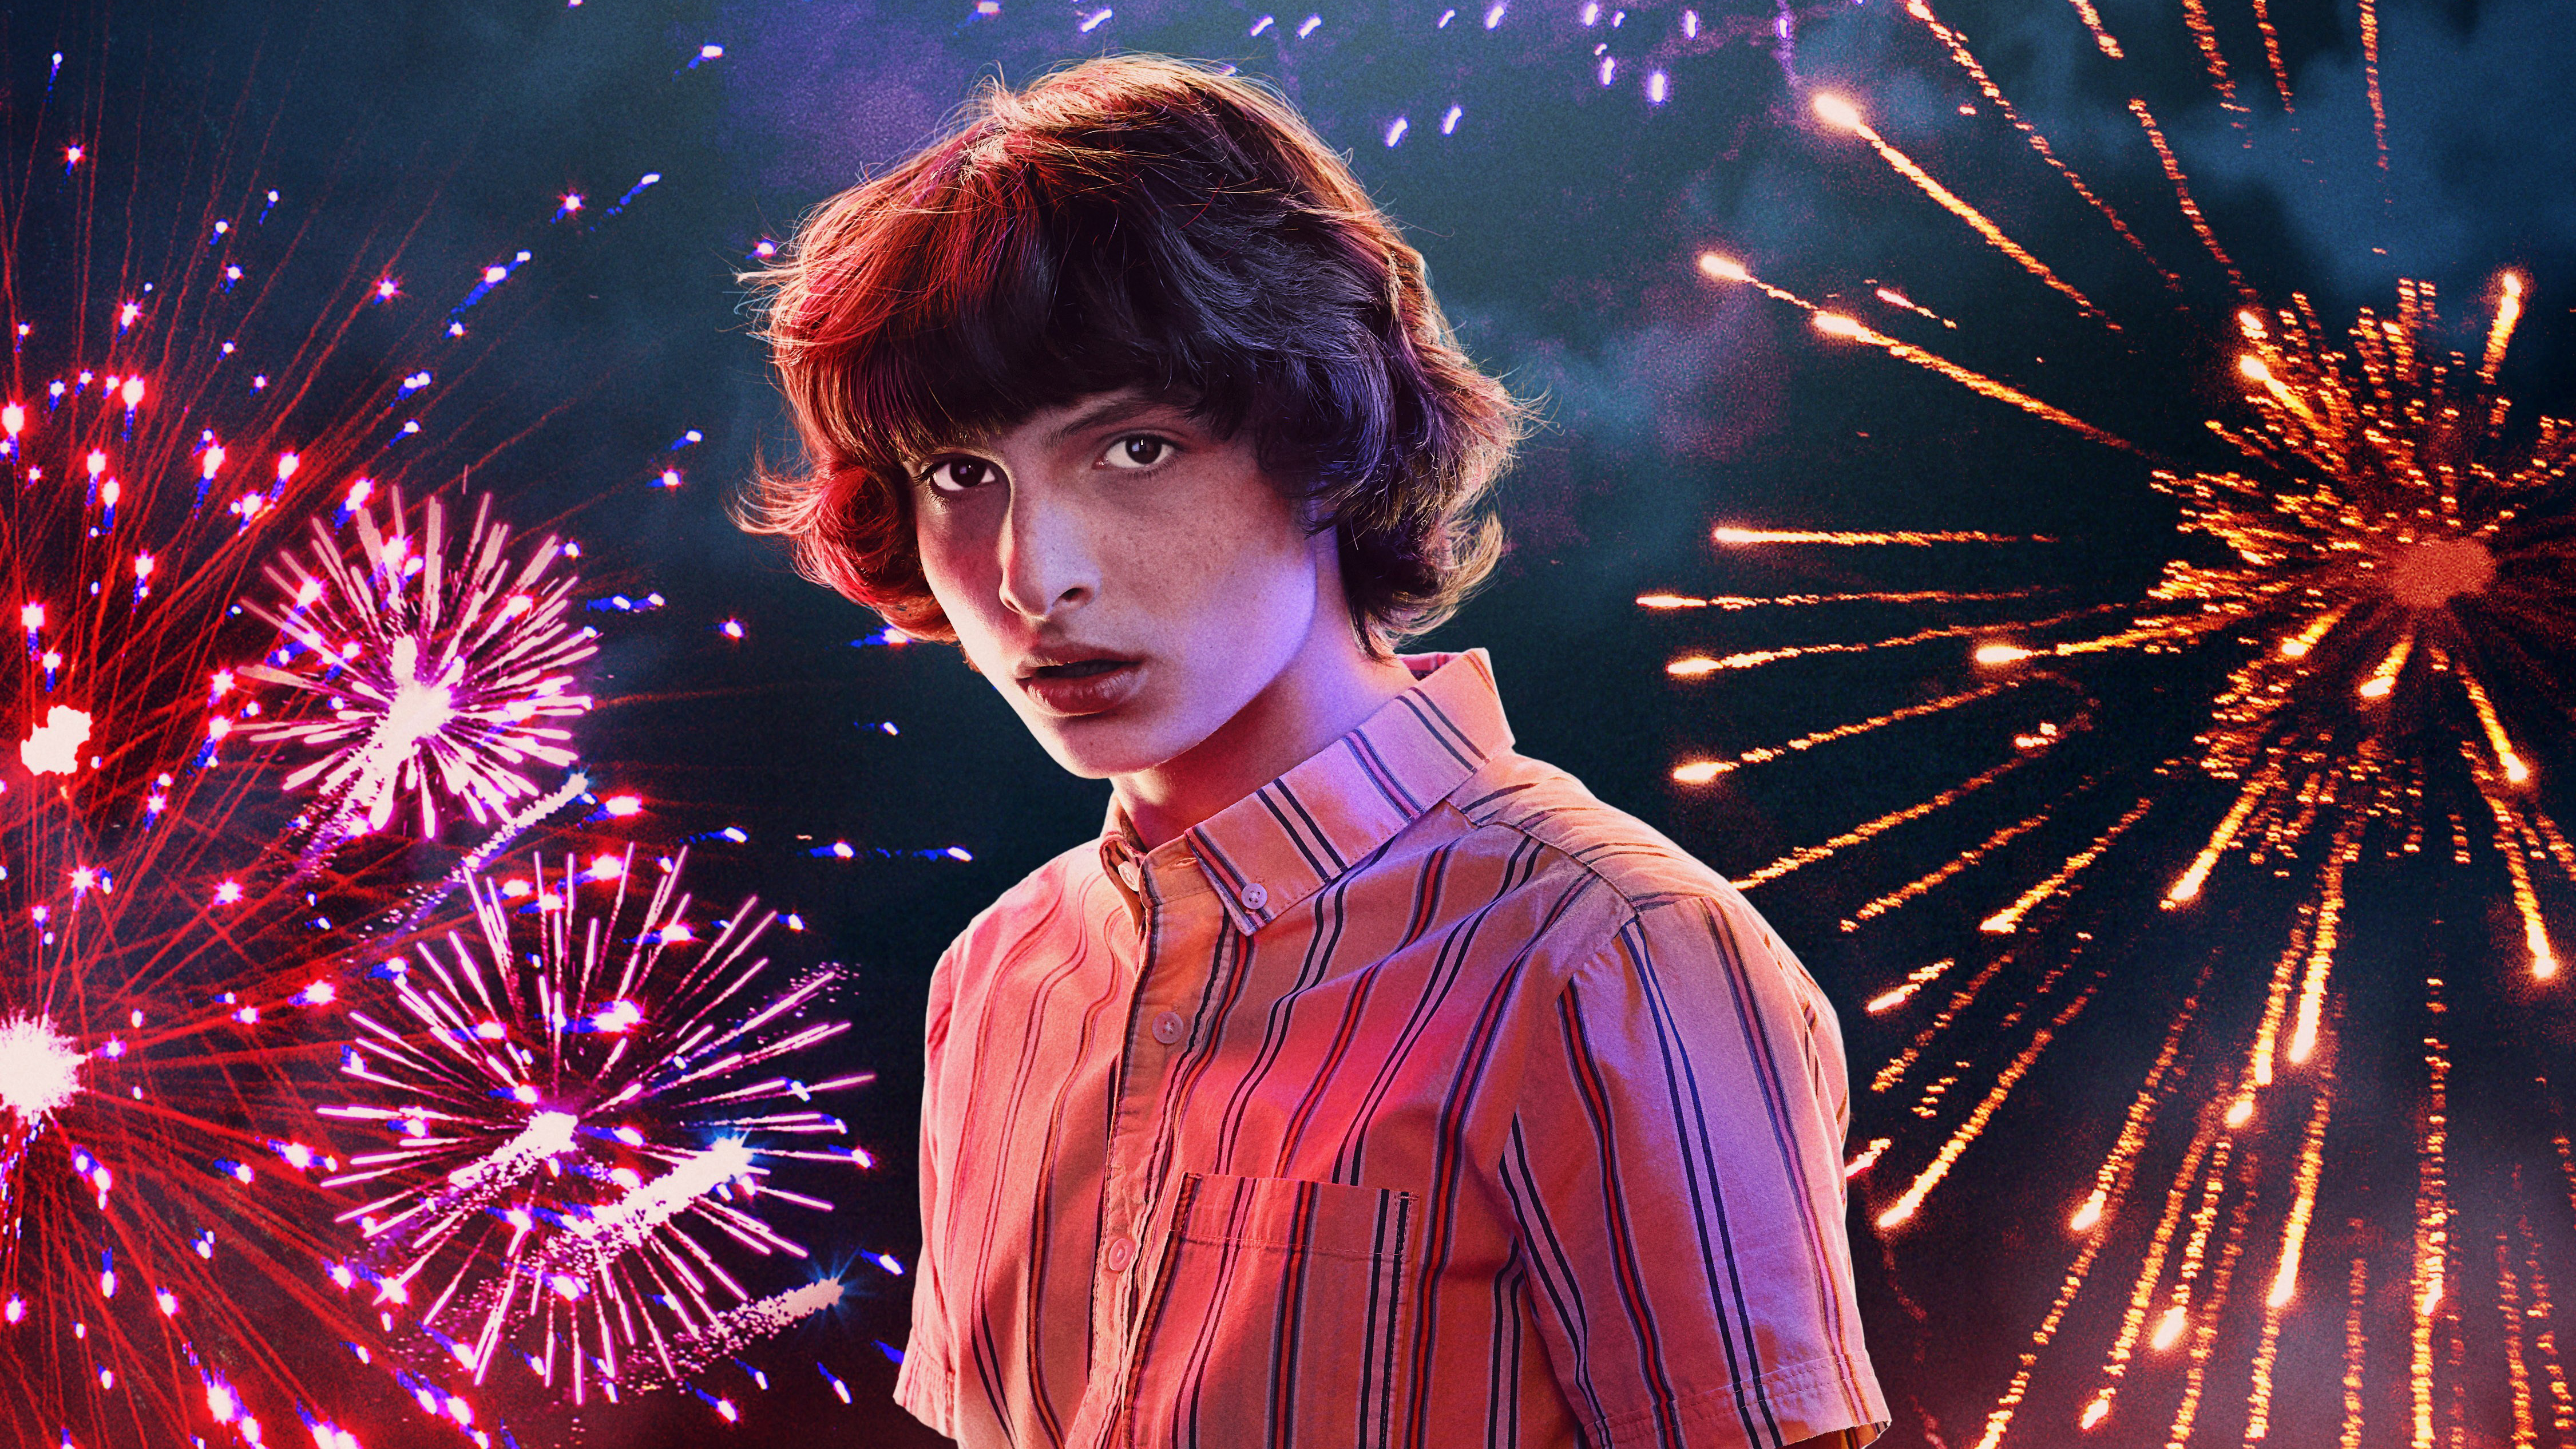 Finn Wolfhard wallpapers for desktop, download free Finn Wolfhard pictures  and backgrounds for PC | mob.org